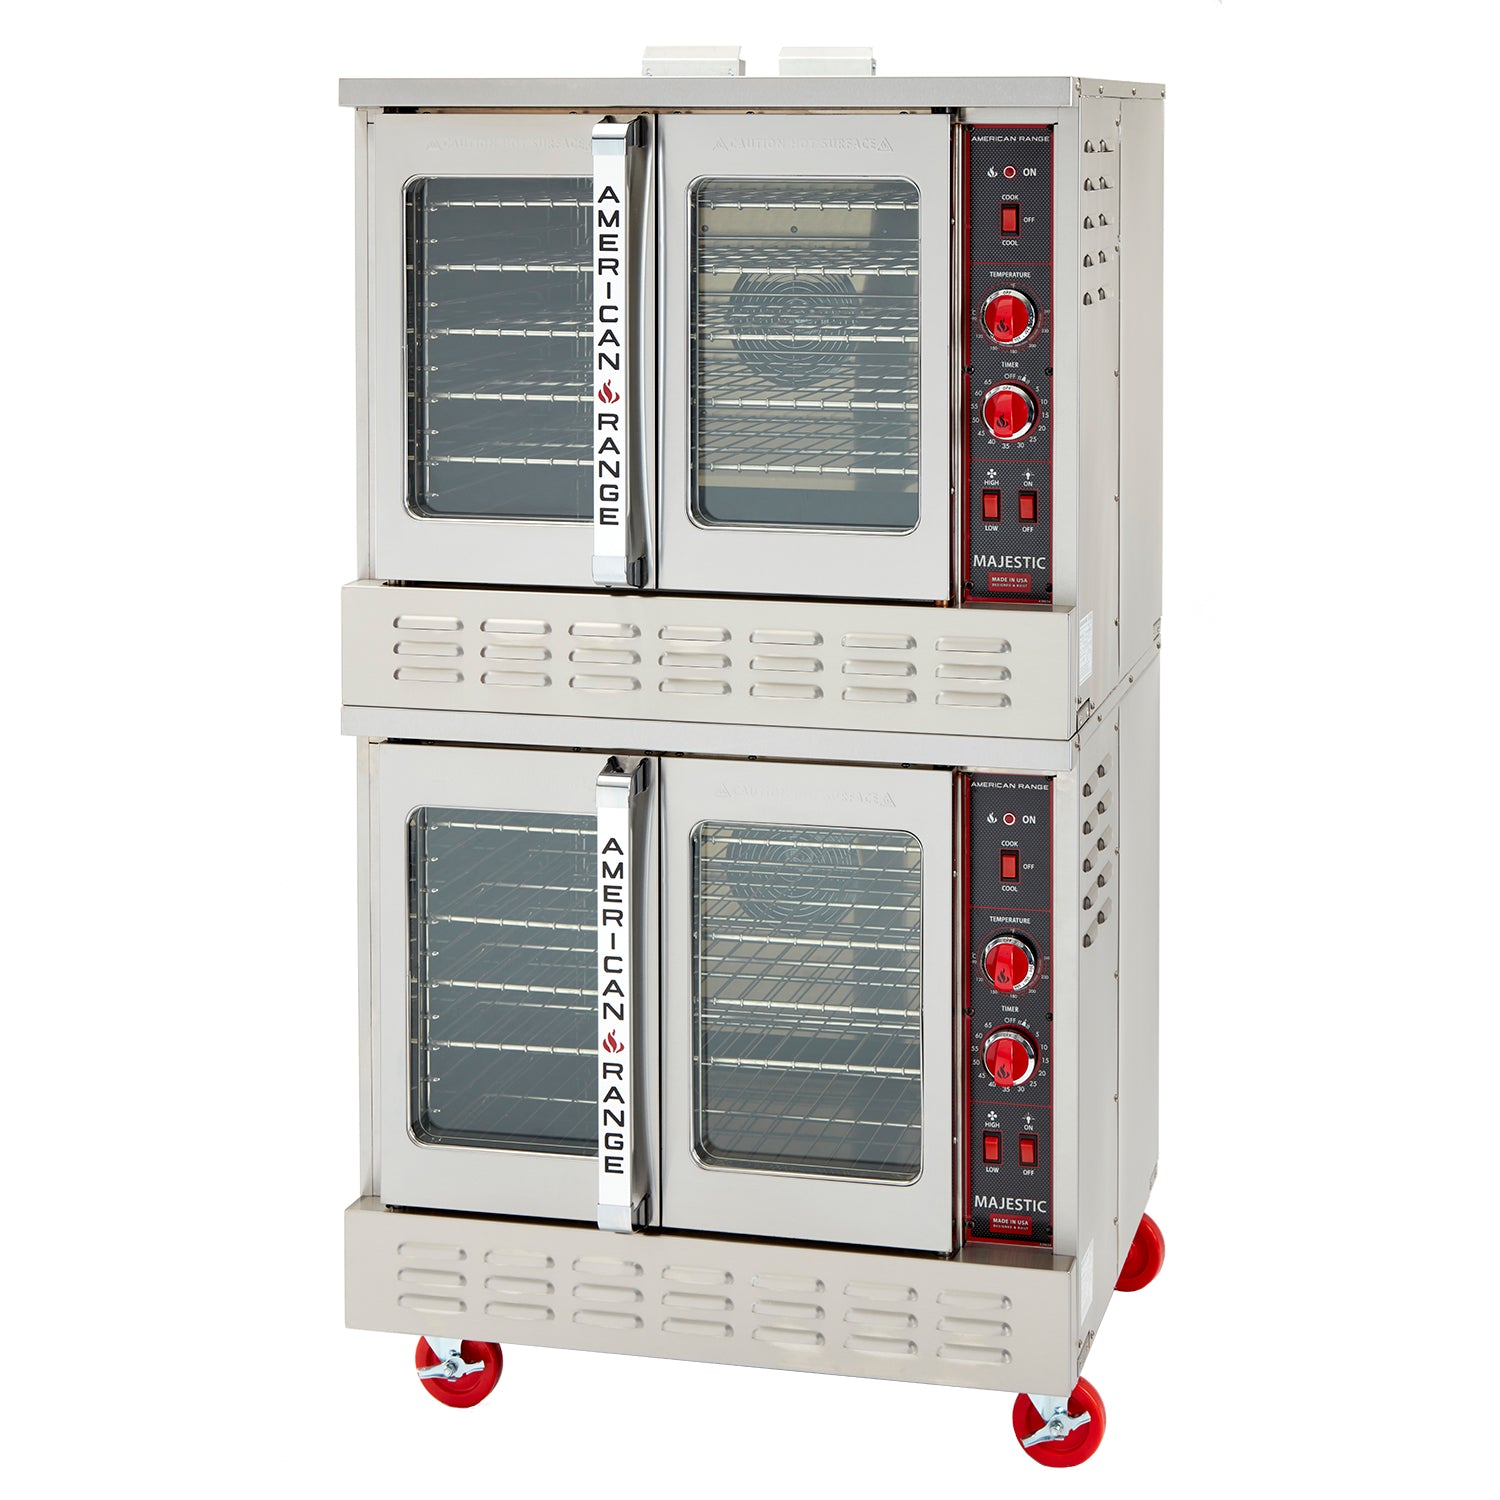 Majestic Convection Ovens Electric Bakery